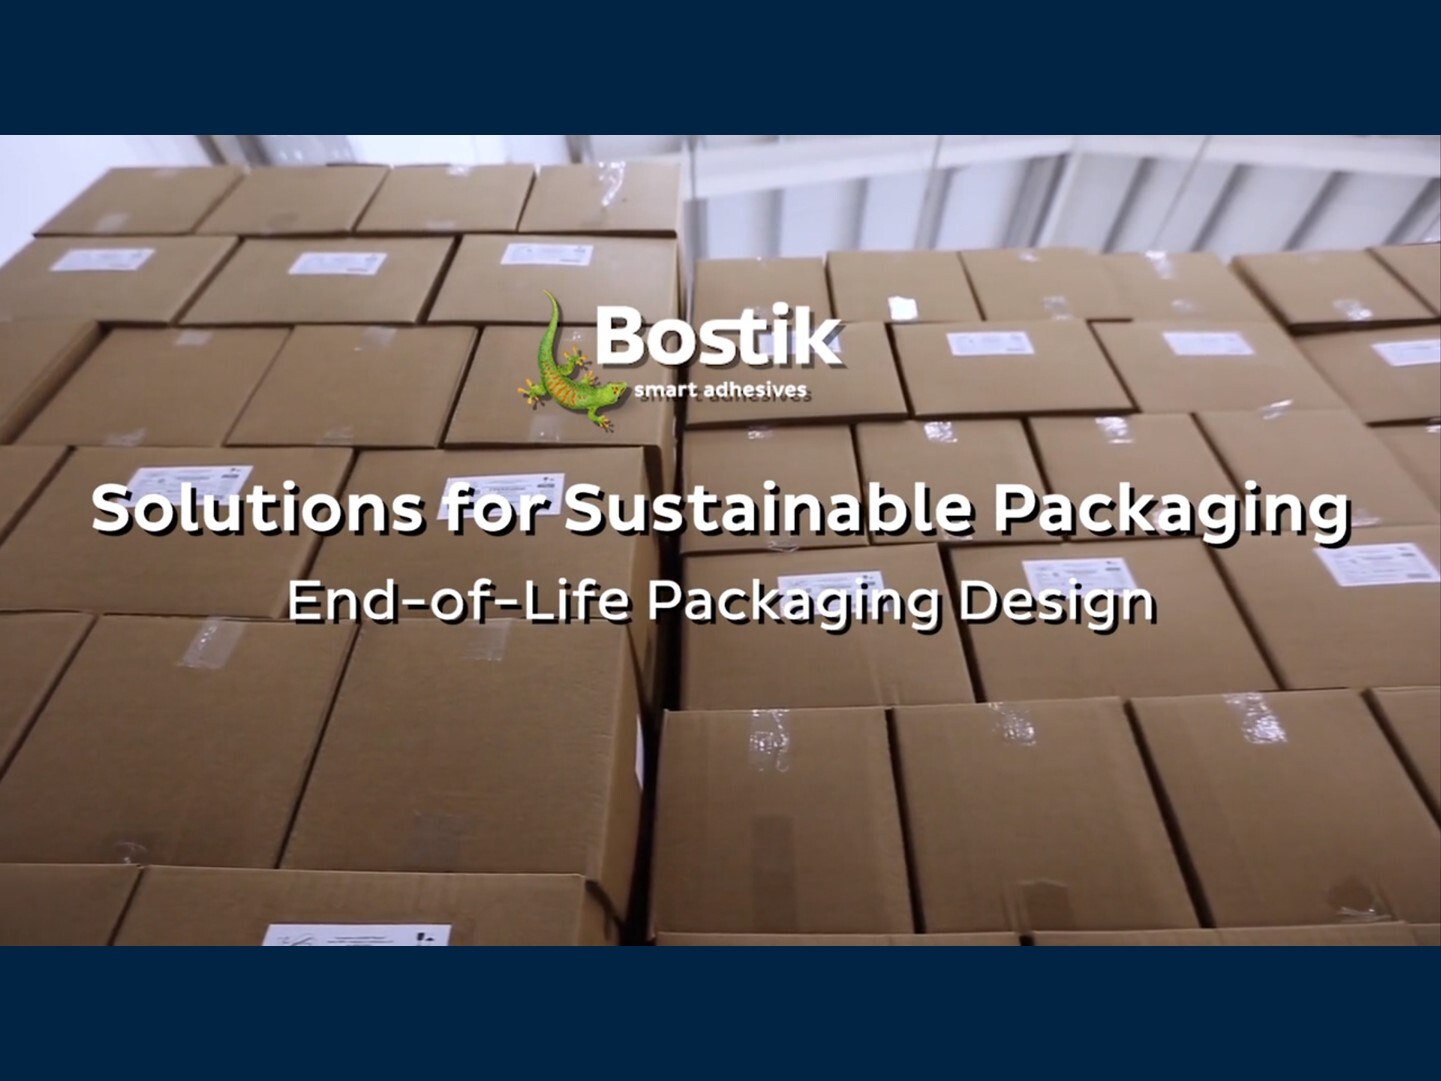 Solutions for Sustainable Packaging video thumbnail.jpg